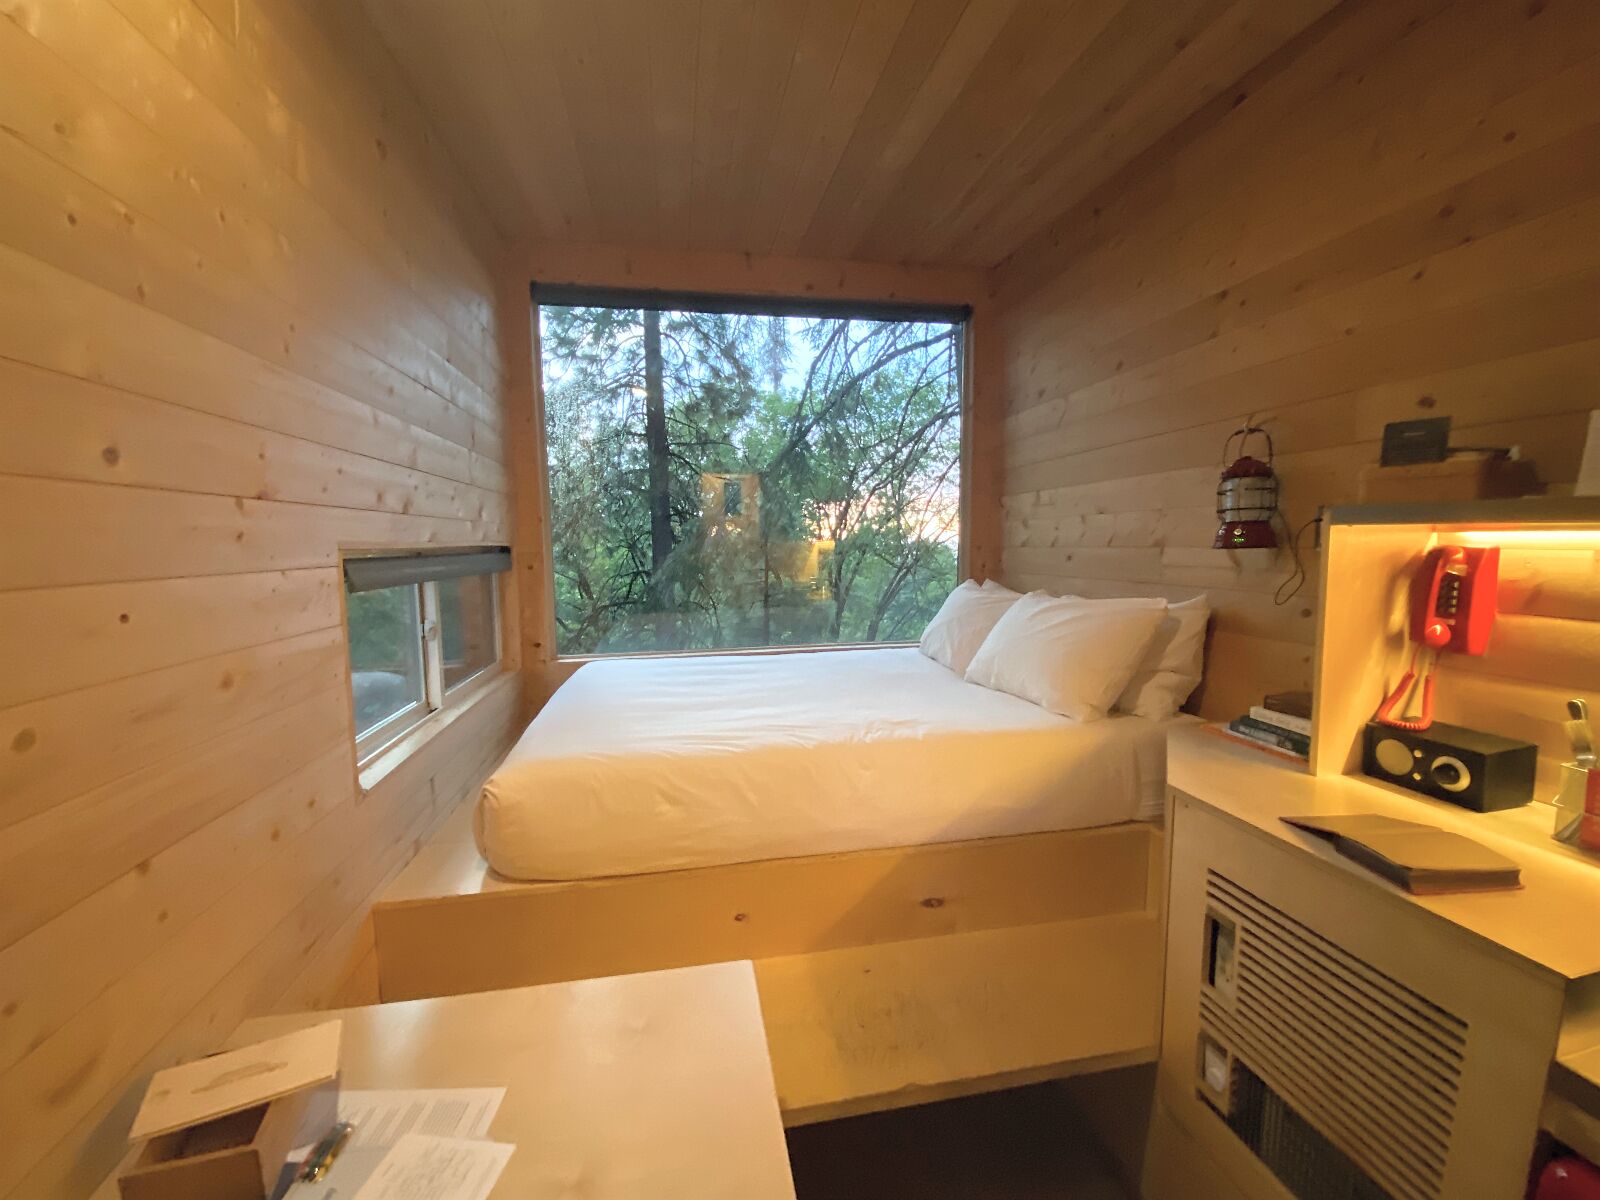 Getaway House, inside of Tiny Cabin with big bed over giant indow